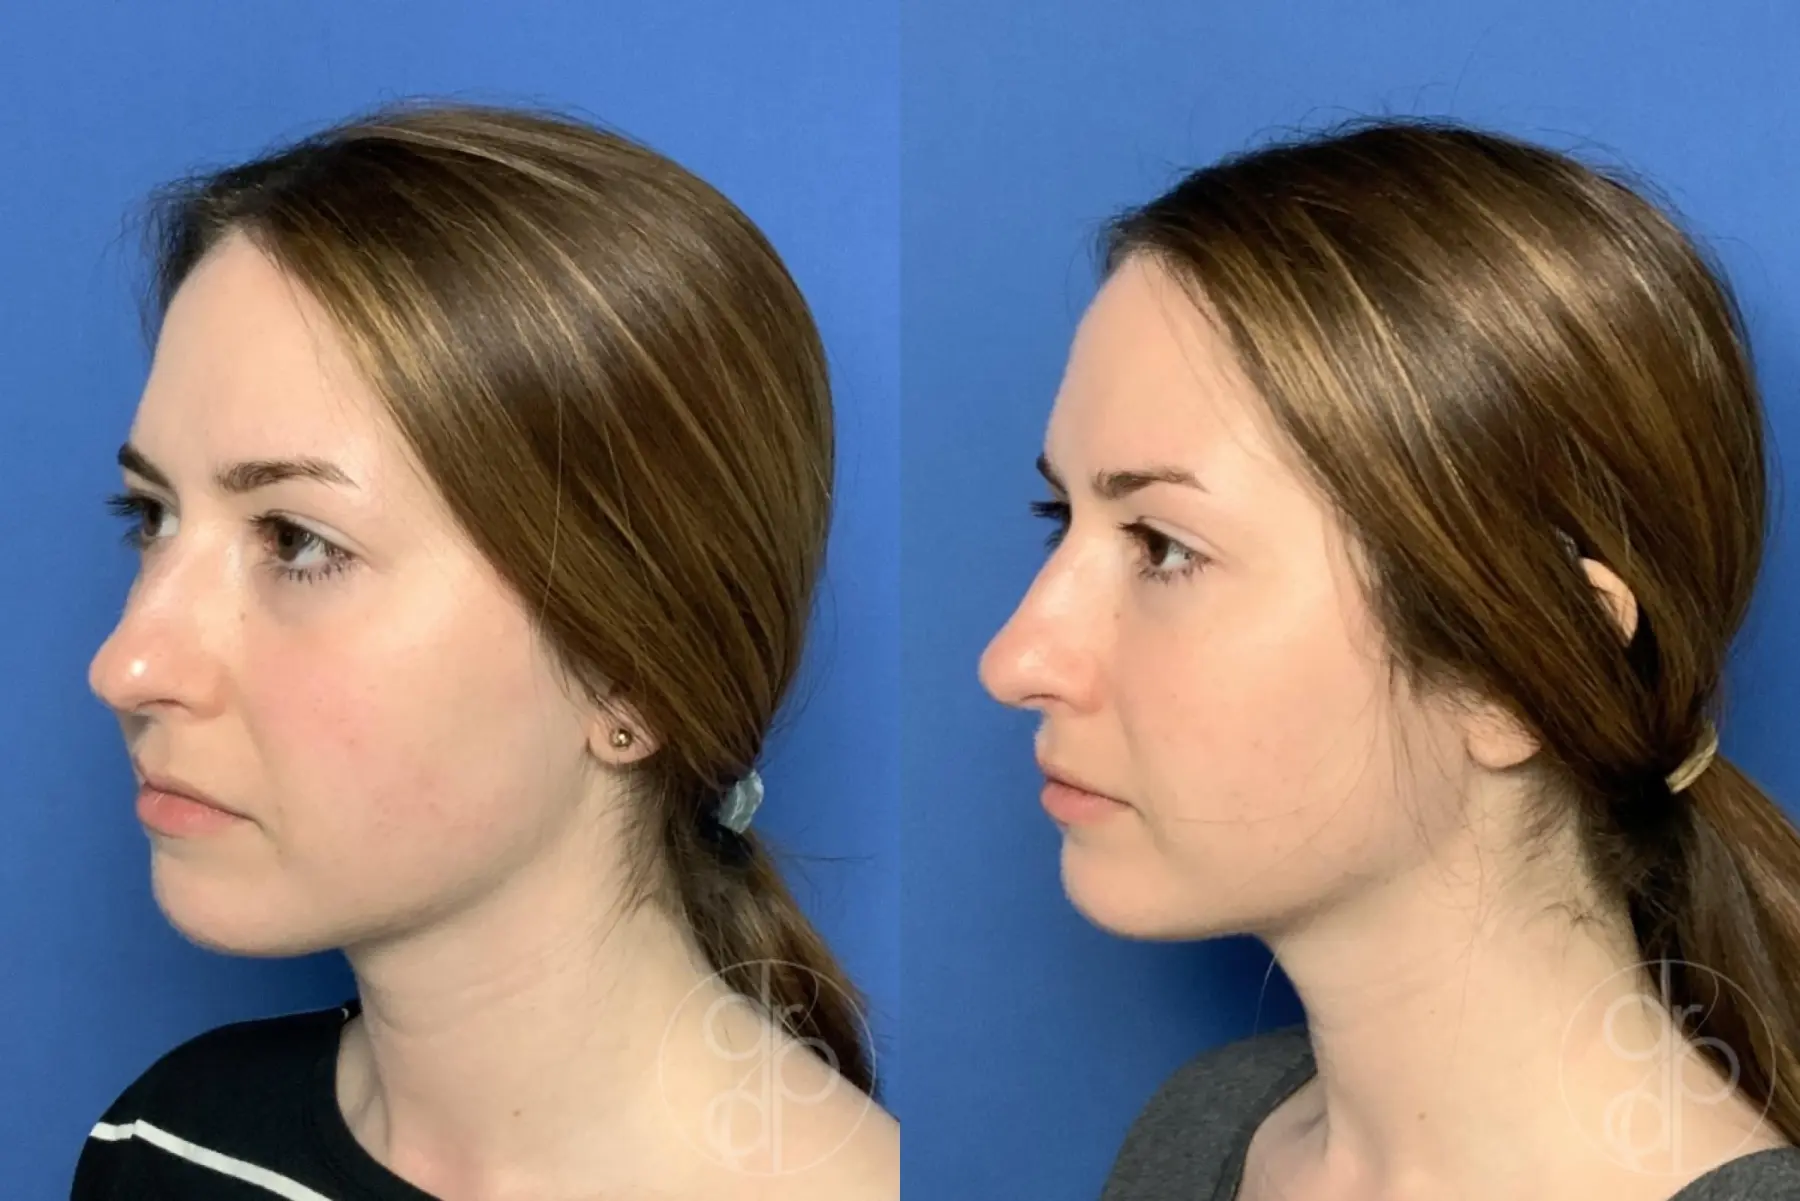 patient 13355 fillers before and after result - Before and After 2